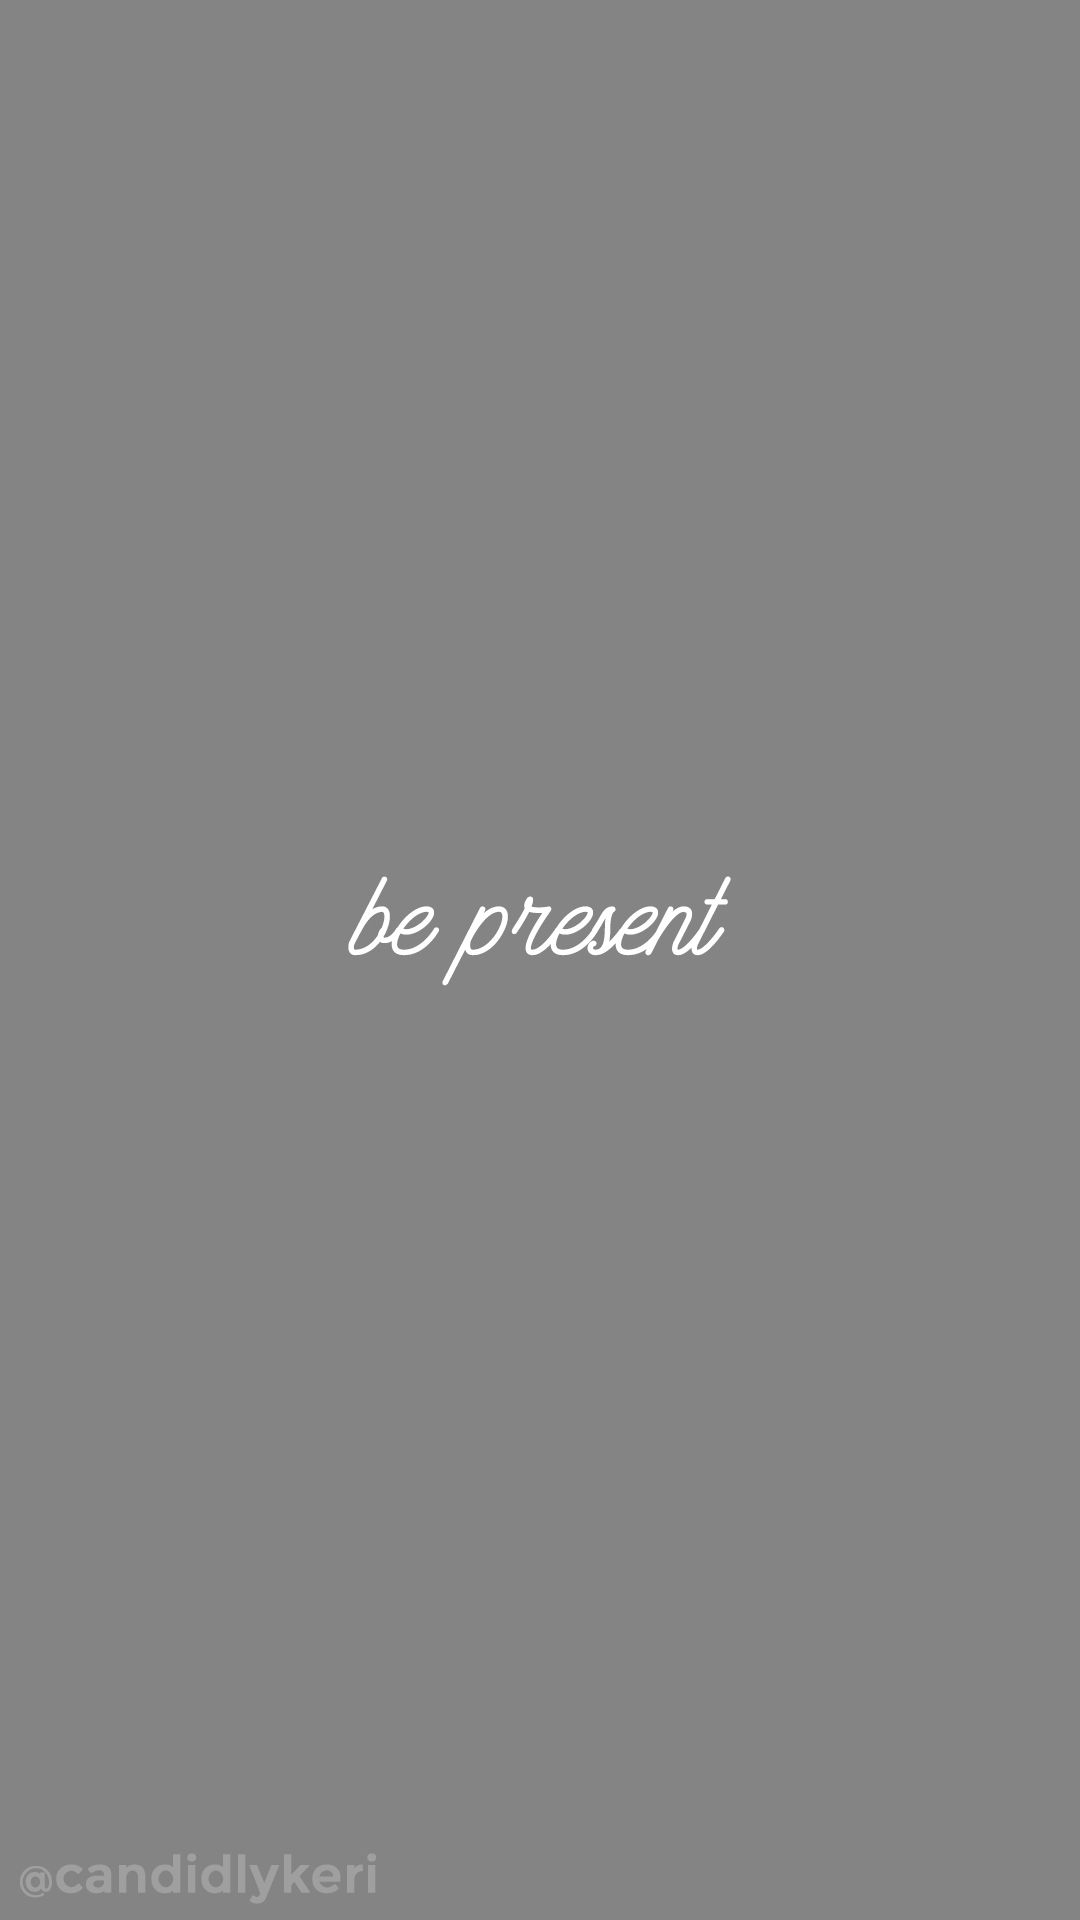 be present quote gray and white inspirational motivational quote background wallpaper you c. Grey wallpaper iphone, Grey wallpaper phone, Grey wallpaper mobile